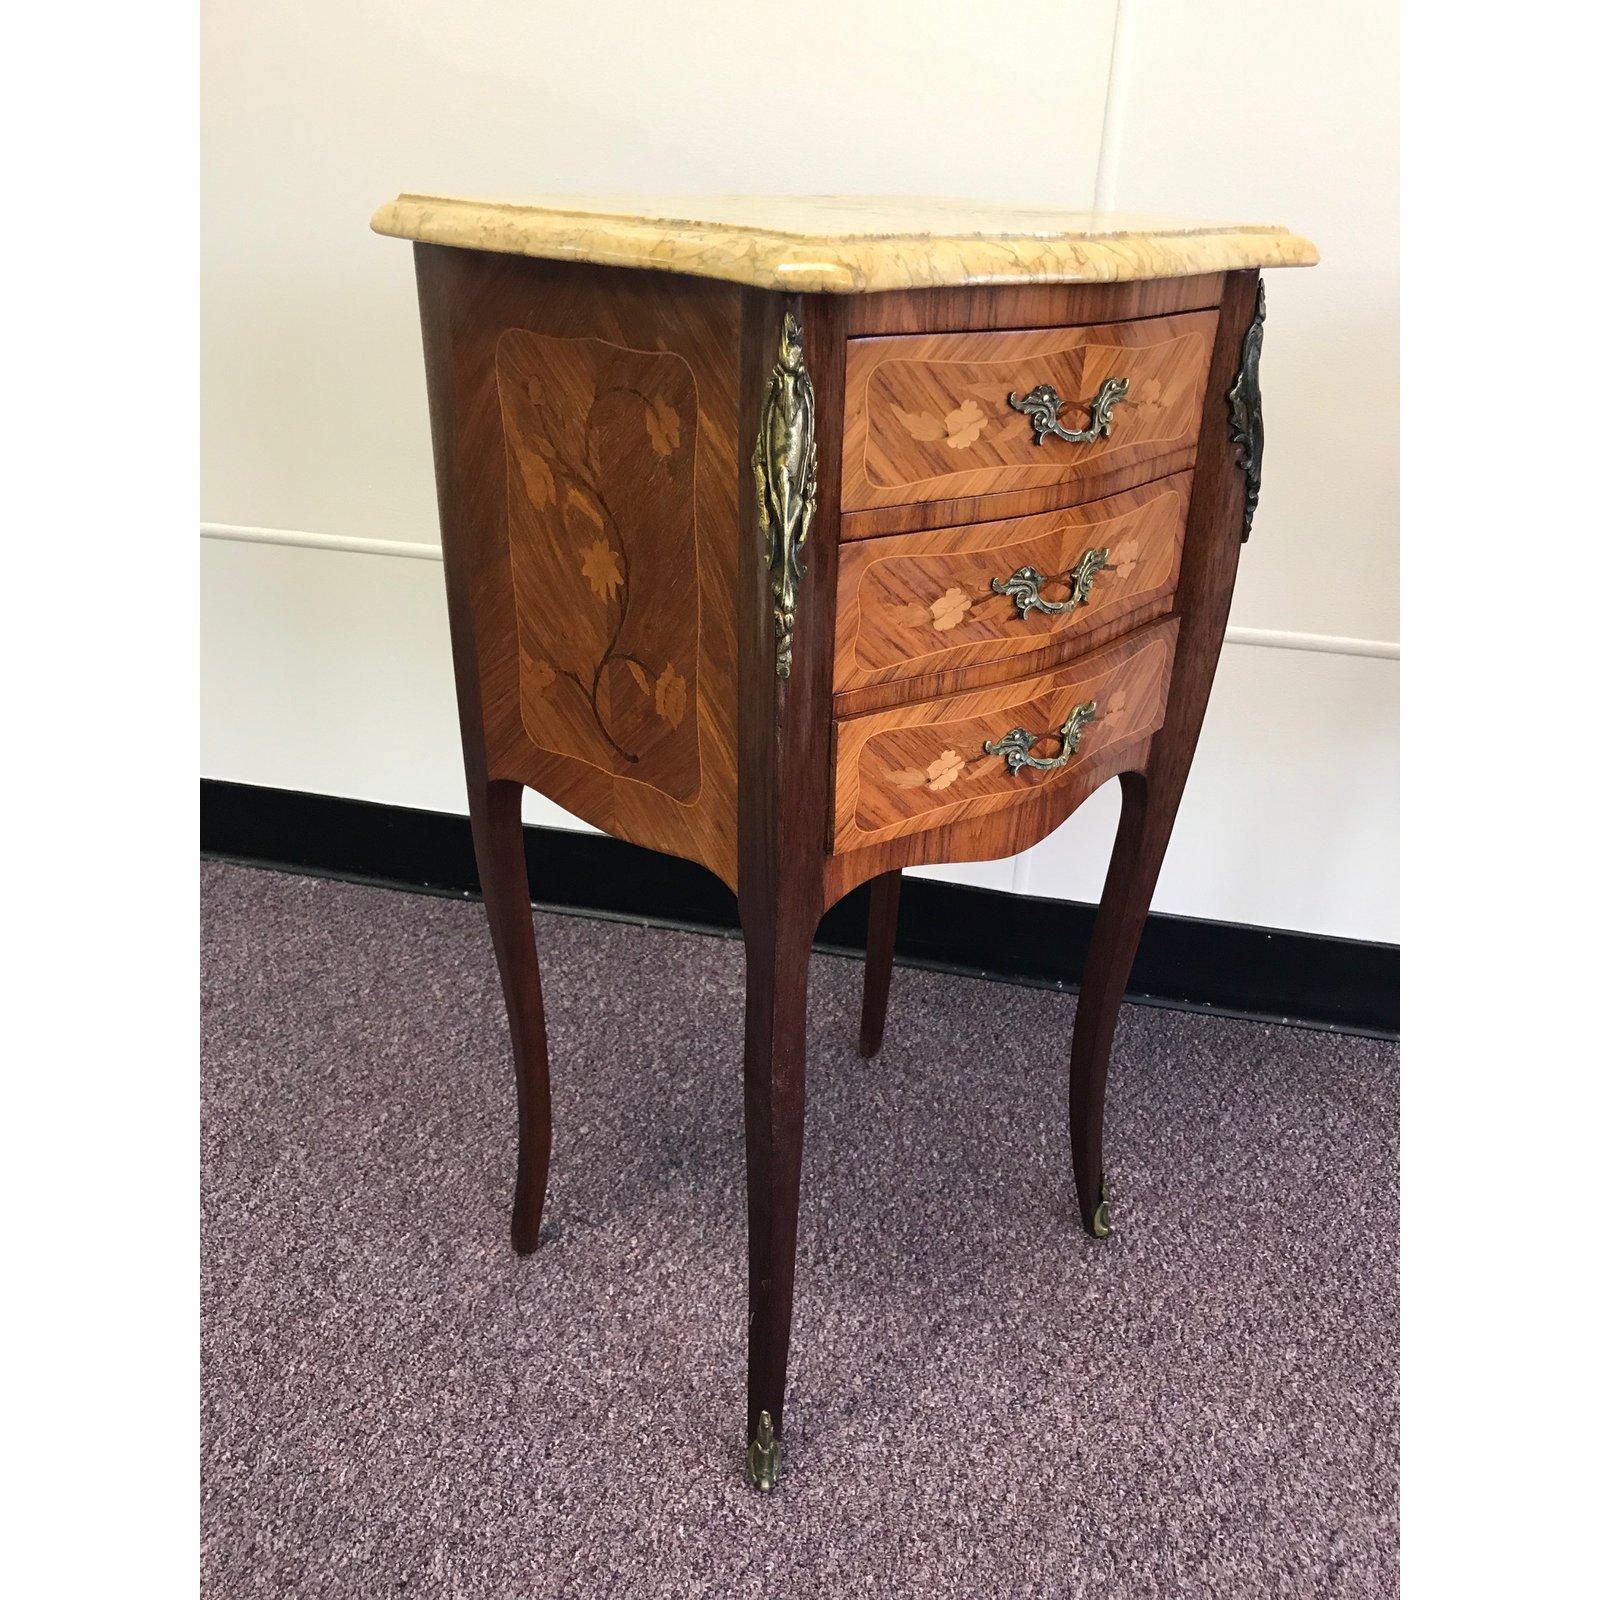 Pair of beautiful inlay French side tables or nightstands from the Brittany region of France. The three drawers are adorned with a mixed wood inlay of a floral design which compliment the original bronze drawer pulls. There are additional bronze